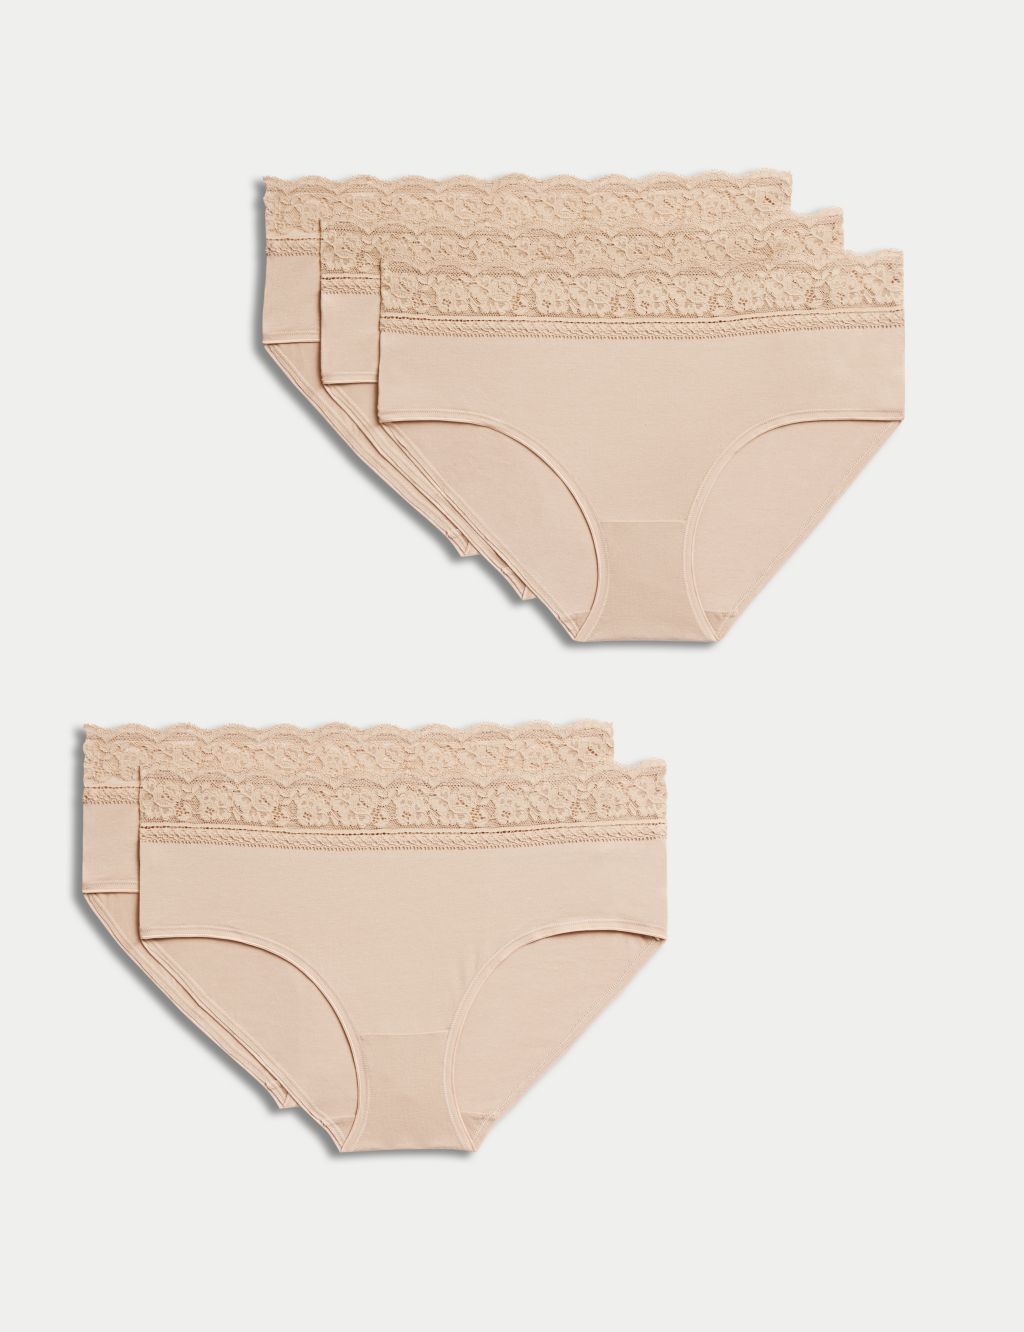 M&S COLLECTION Nude Mix Lace Low Rise Brazilian Knickers T617867 Size UK 14  BNWT 7259005000000 on eBid Canada